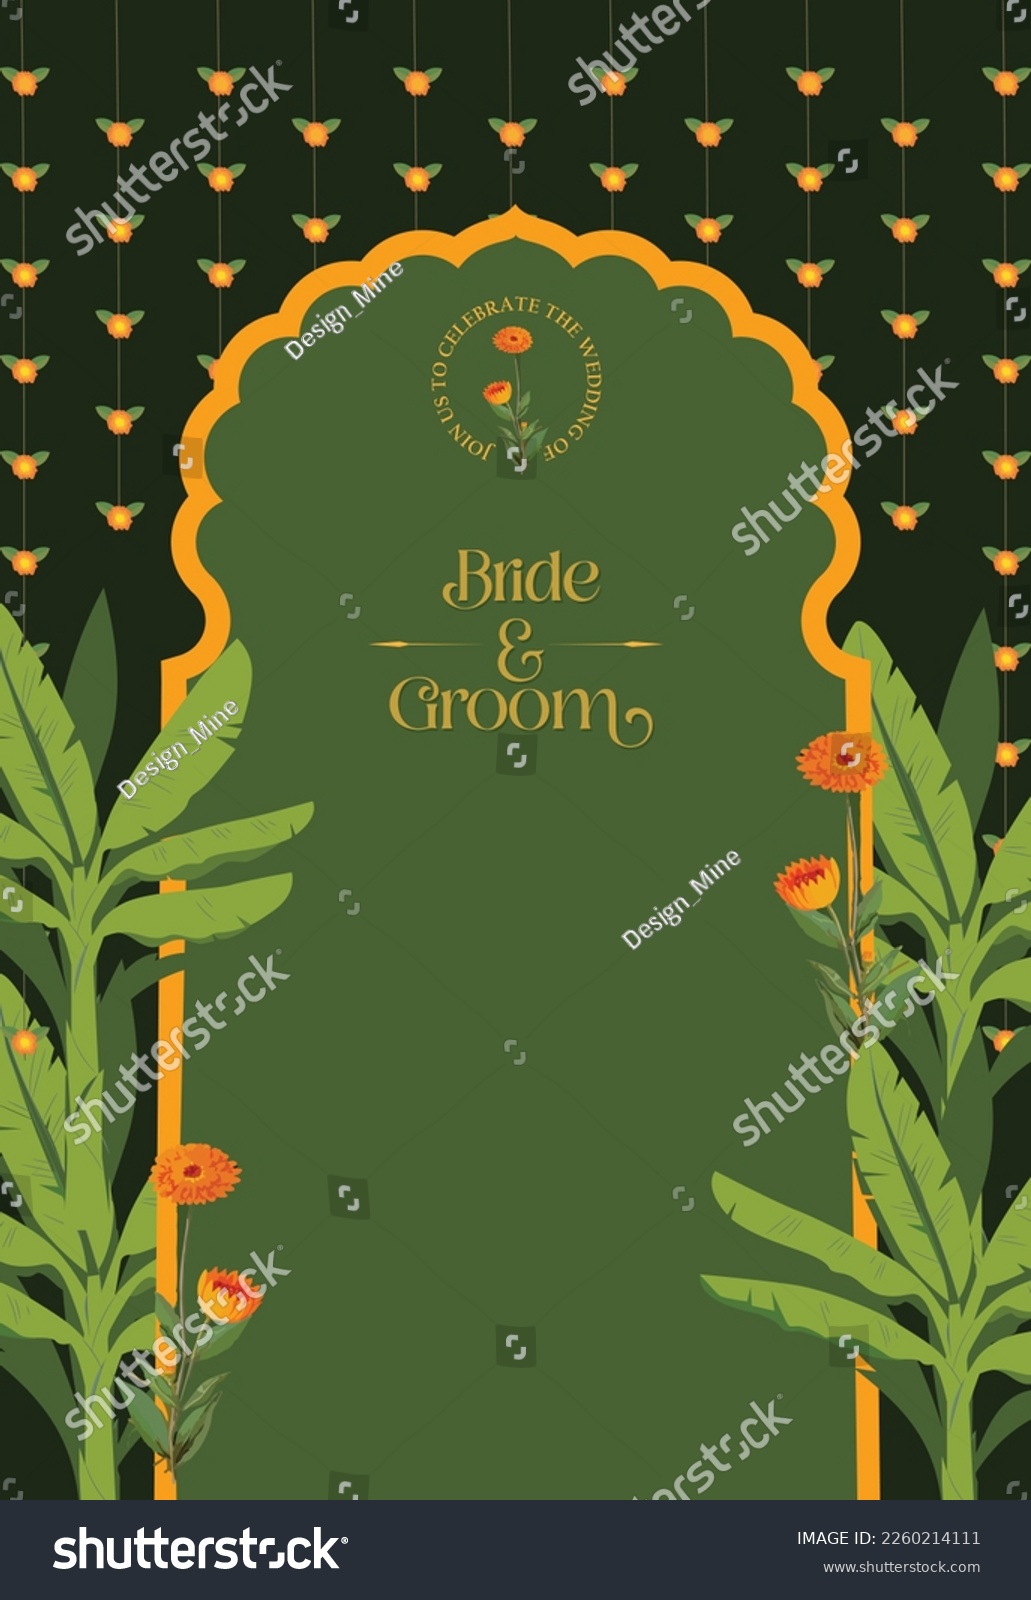 SVG of A Luxurious and royal Invitation card template useful for auspicious Indian days, such as House Warming, Puja, Wedding, Engagements, Spiritual activities, etc.  svg